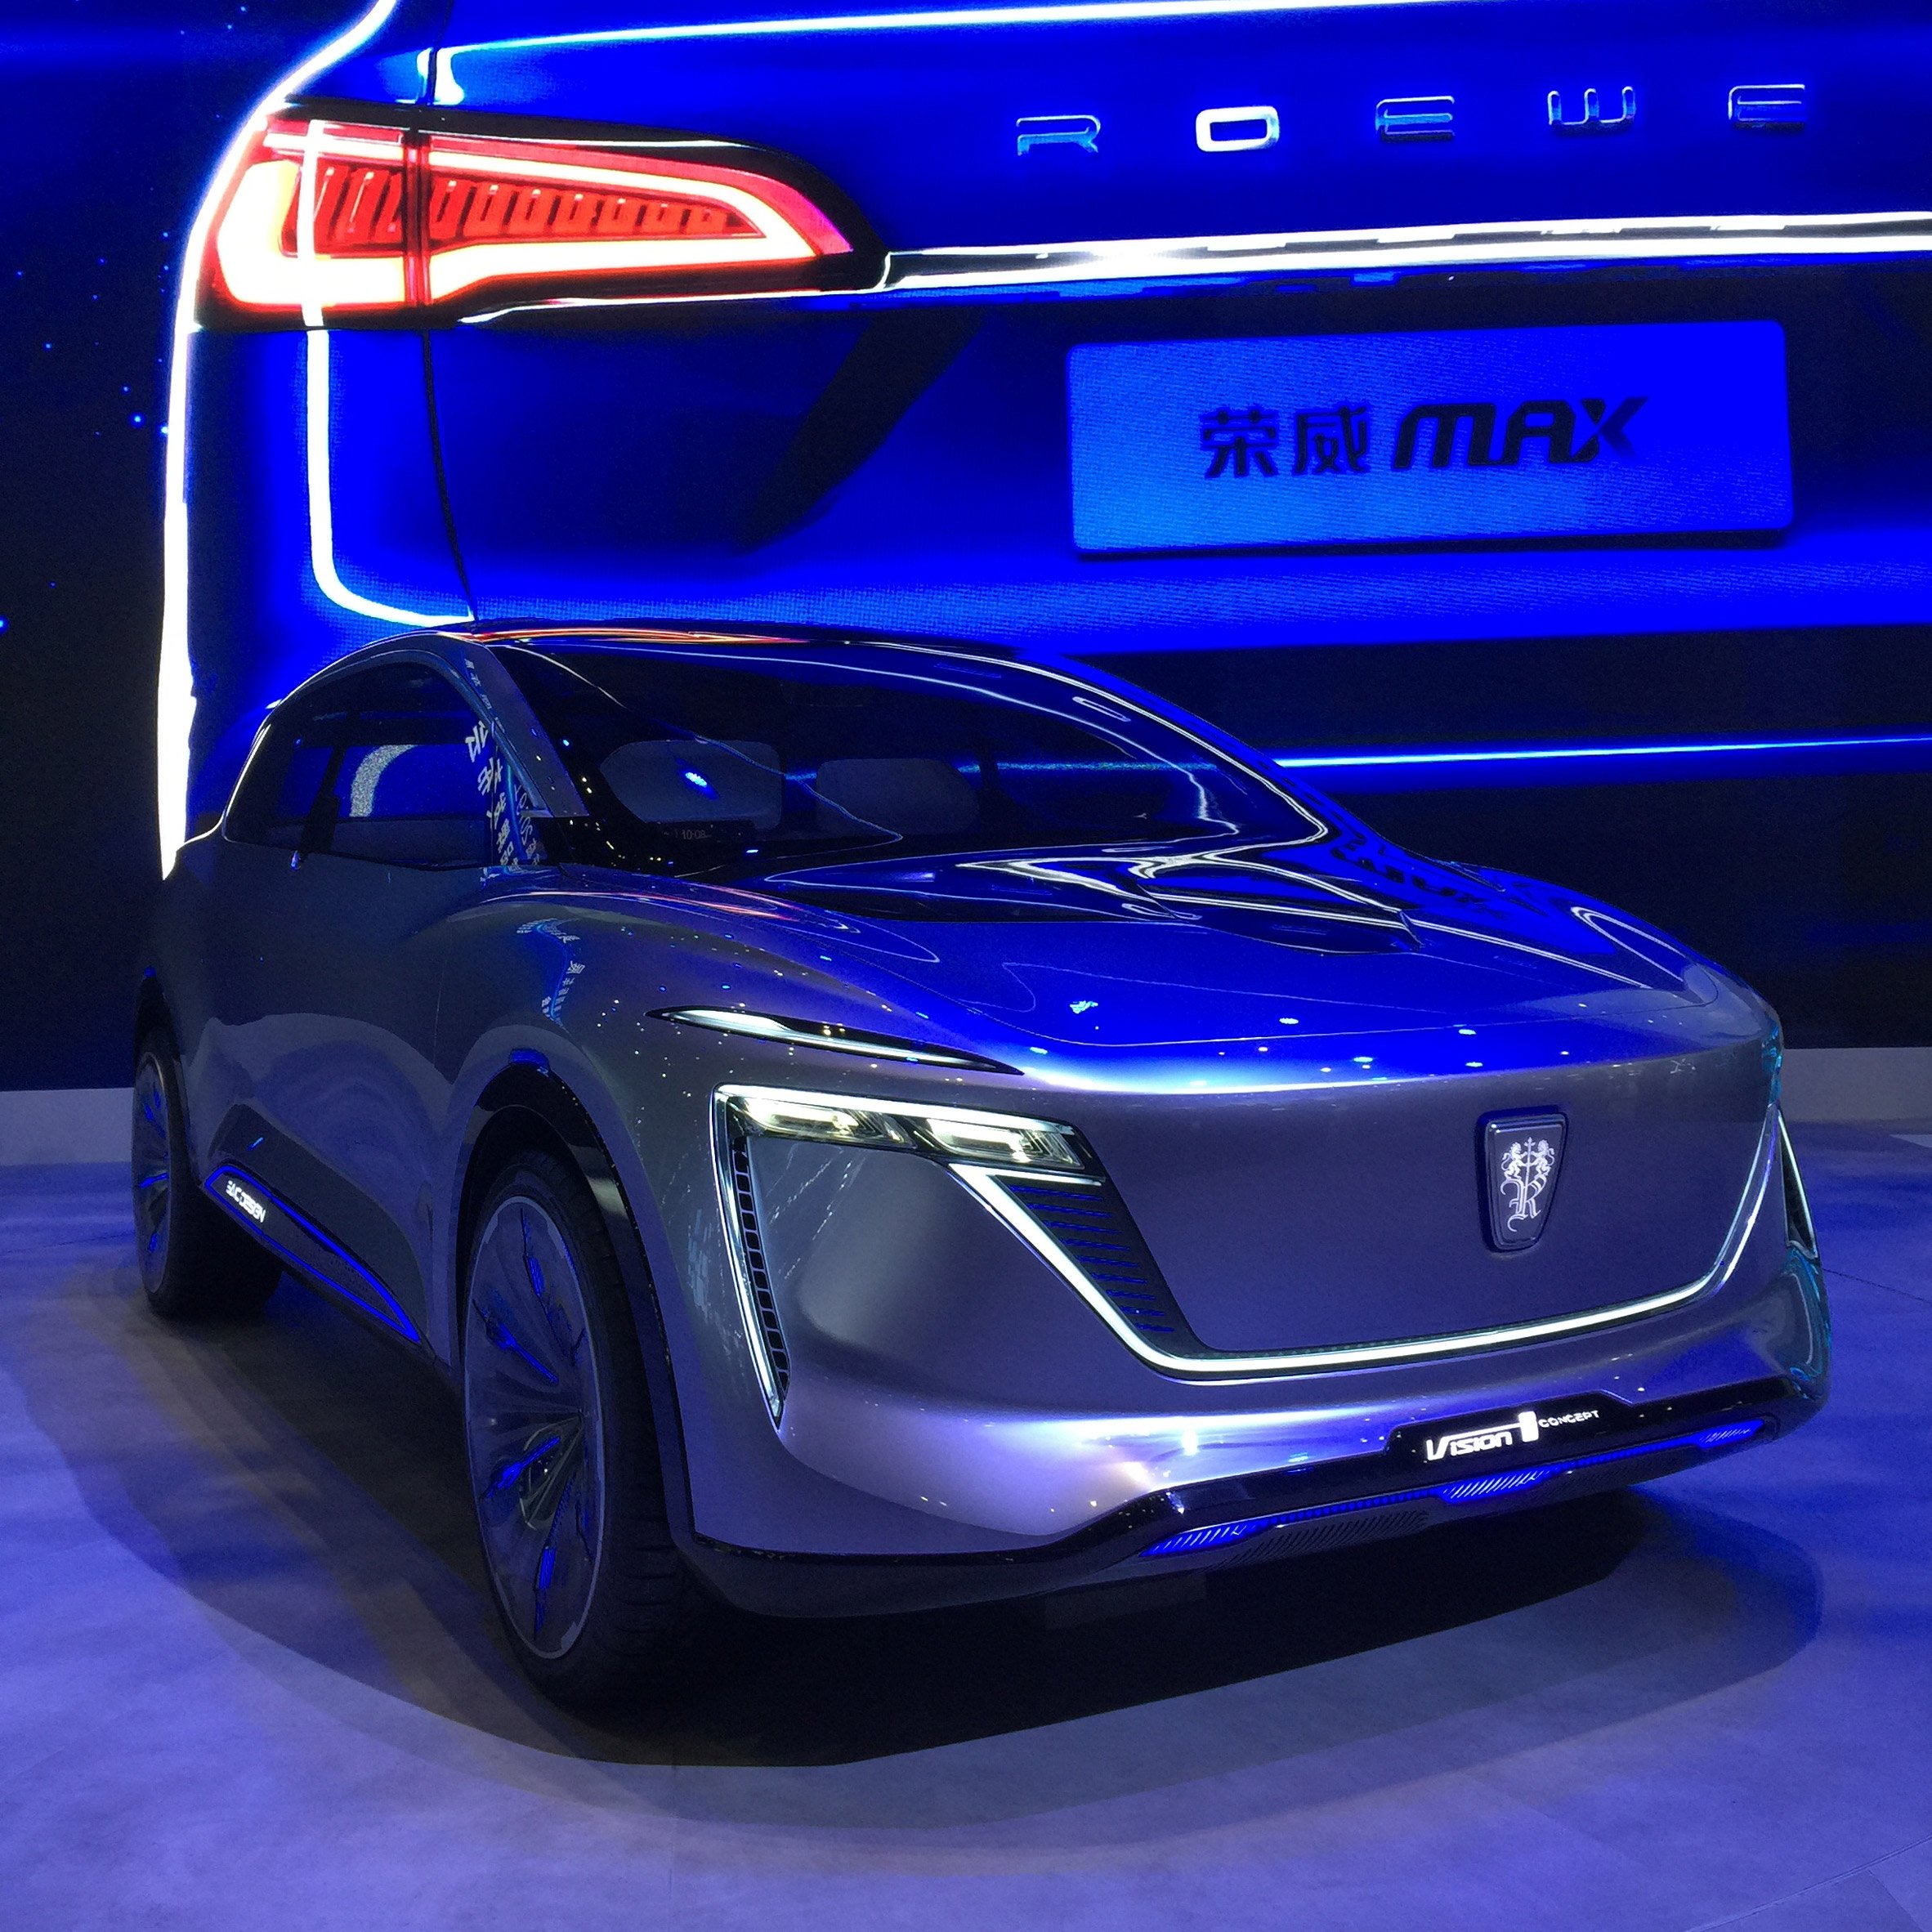 3Novices:10 electric cars unveiled by Chinese car companies at Auto Shanghai 2019 | 3NovicesEurope